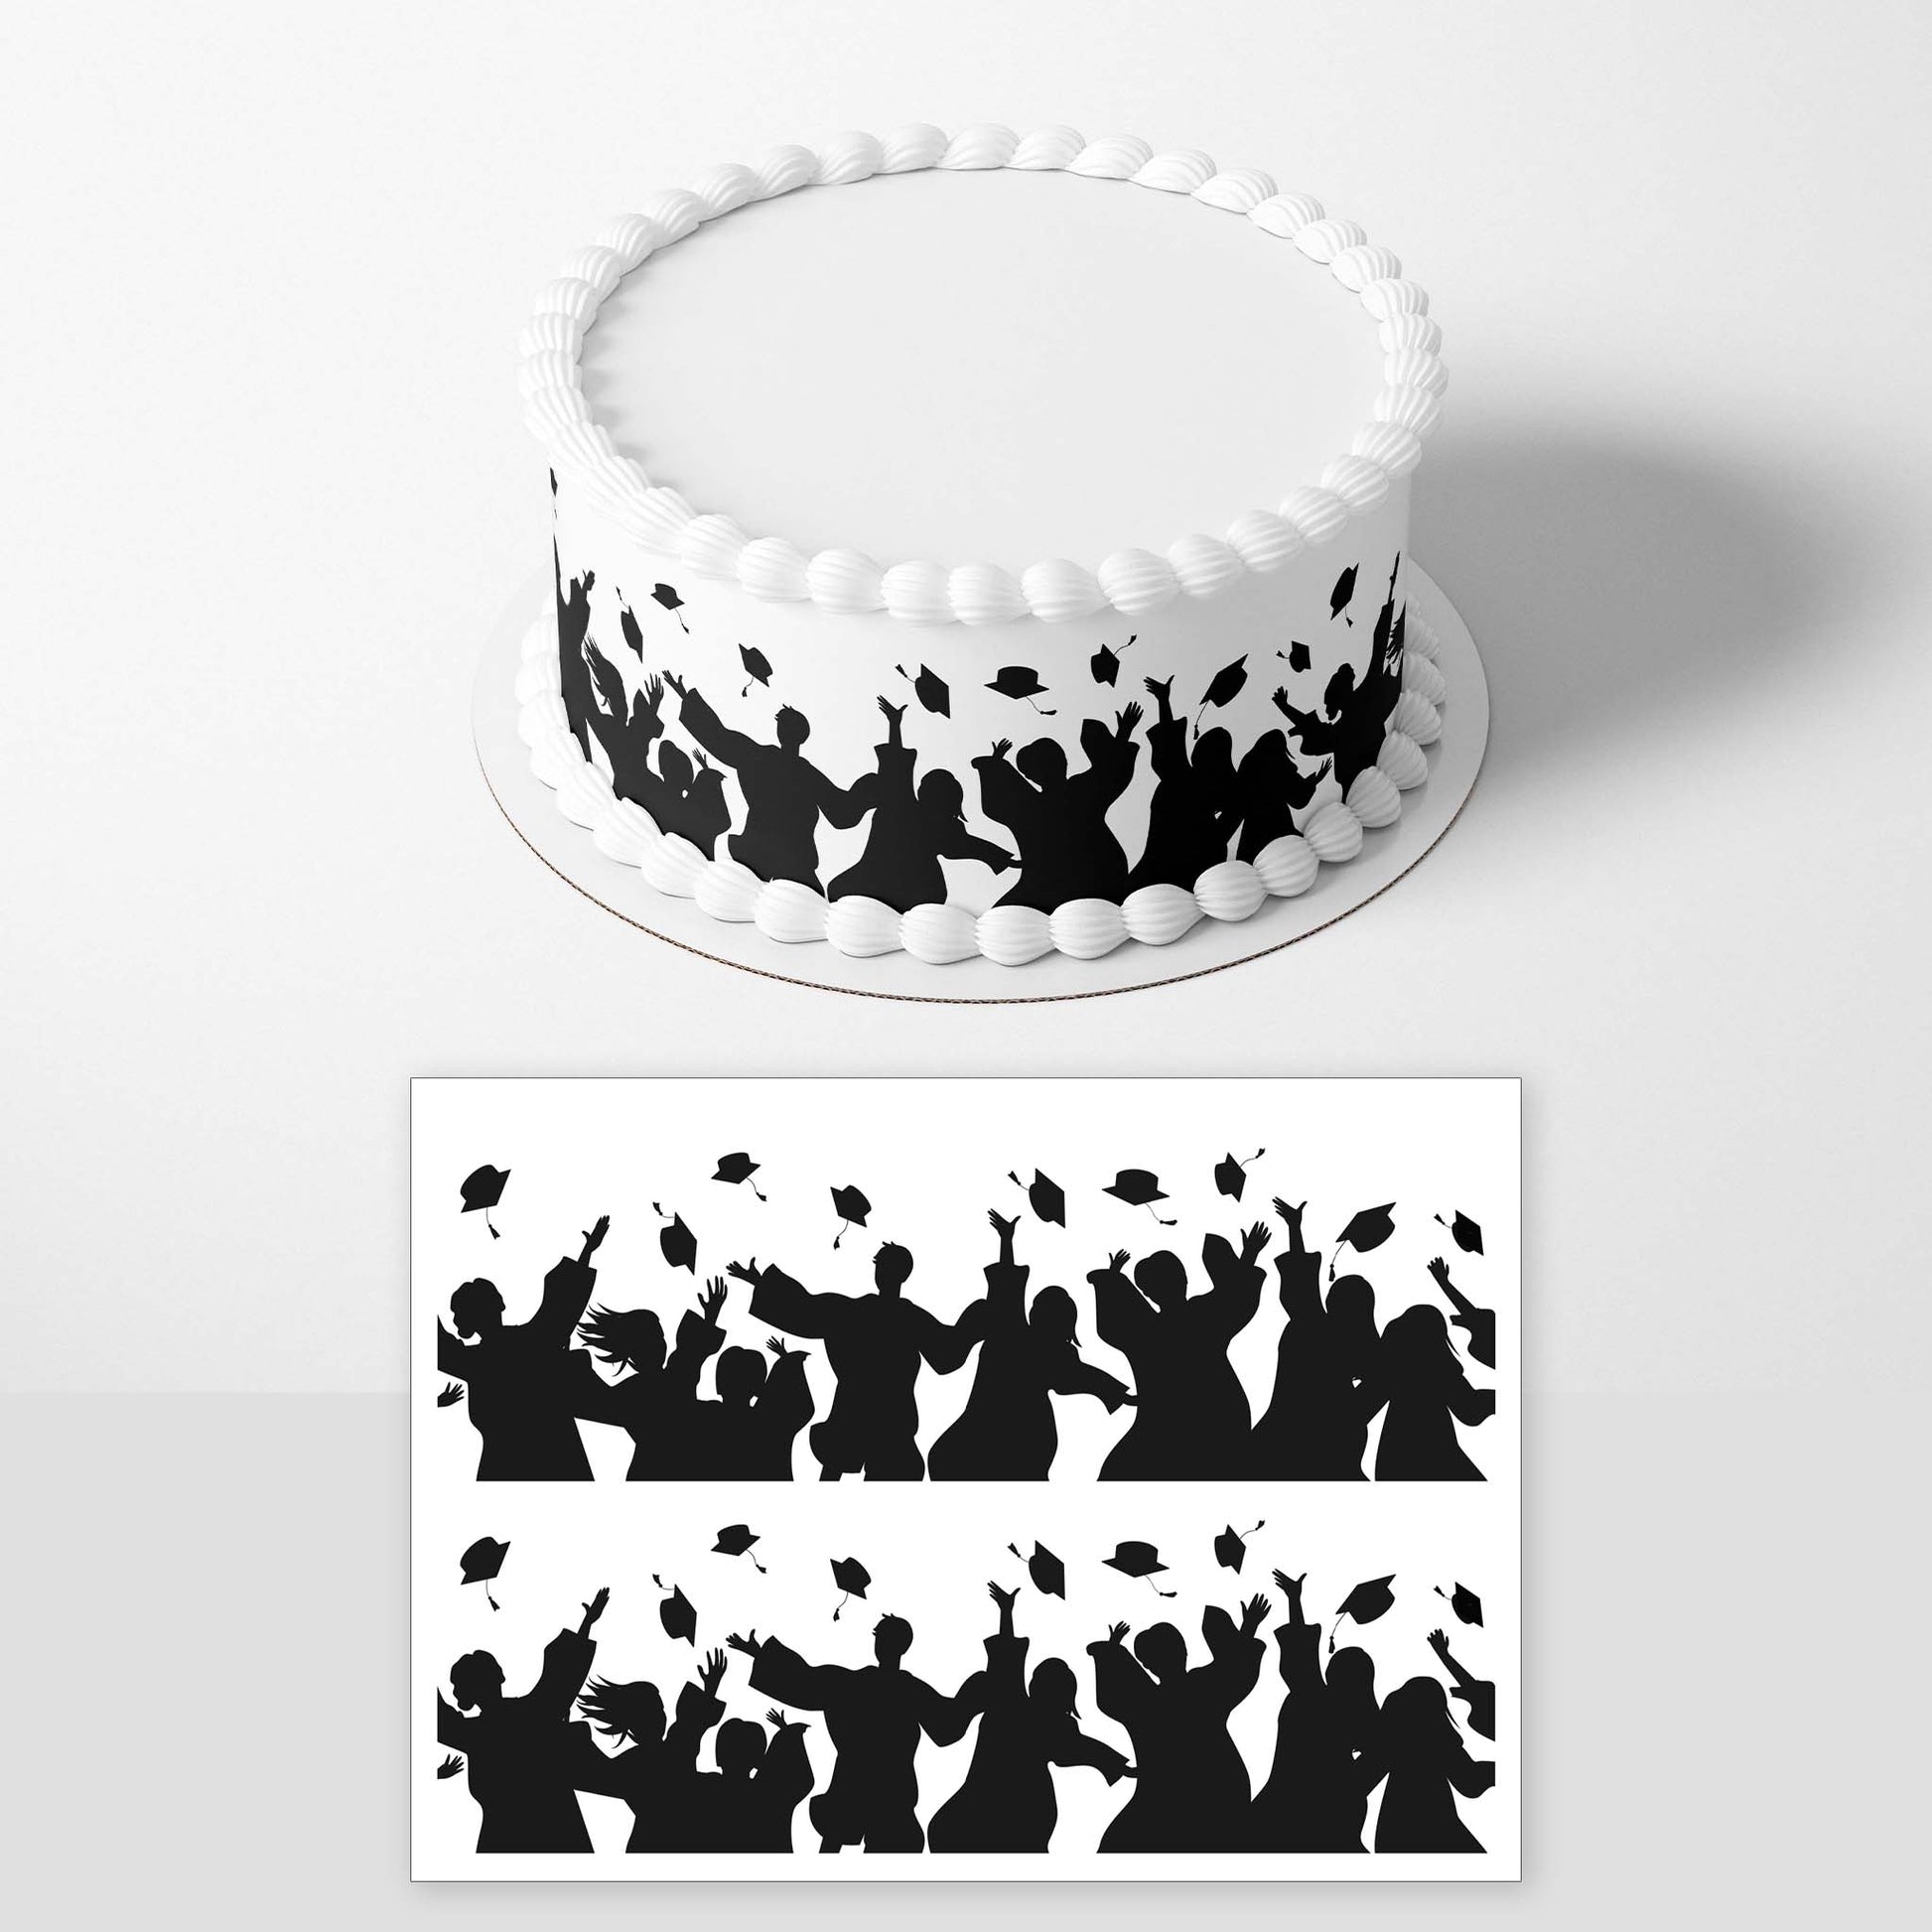 Use this bright Graduation edible icing cake wrap to decorate cakes or any sweet treats. Perfect for celebrating the many accomplishments of the graduate.